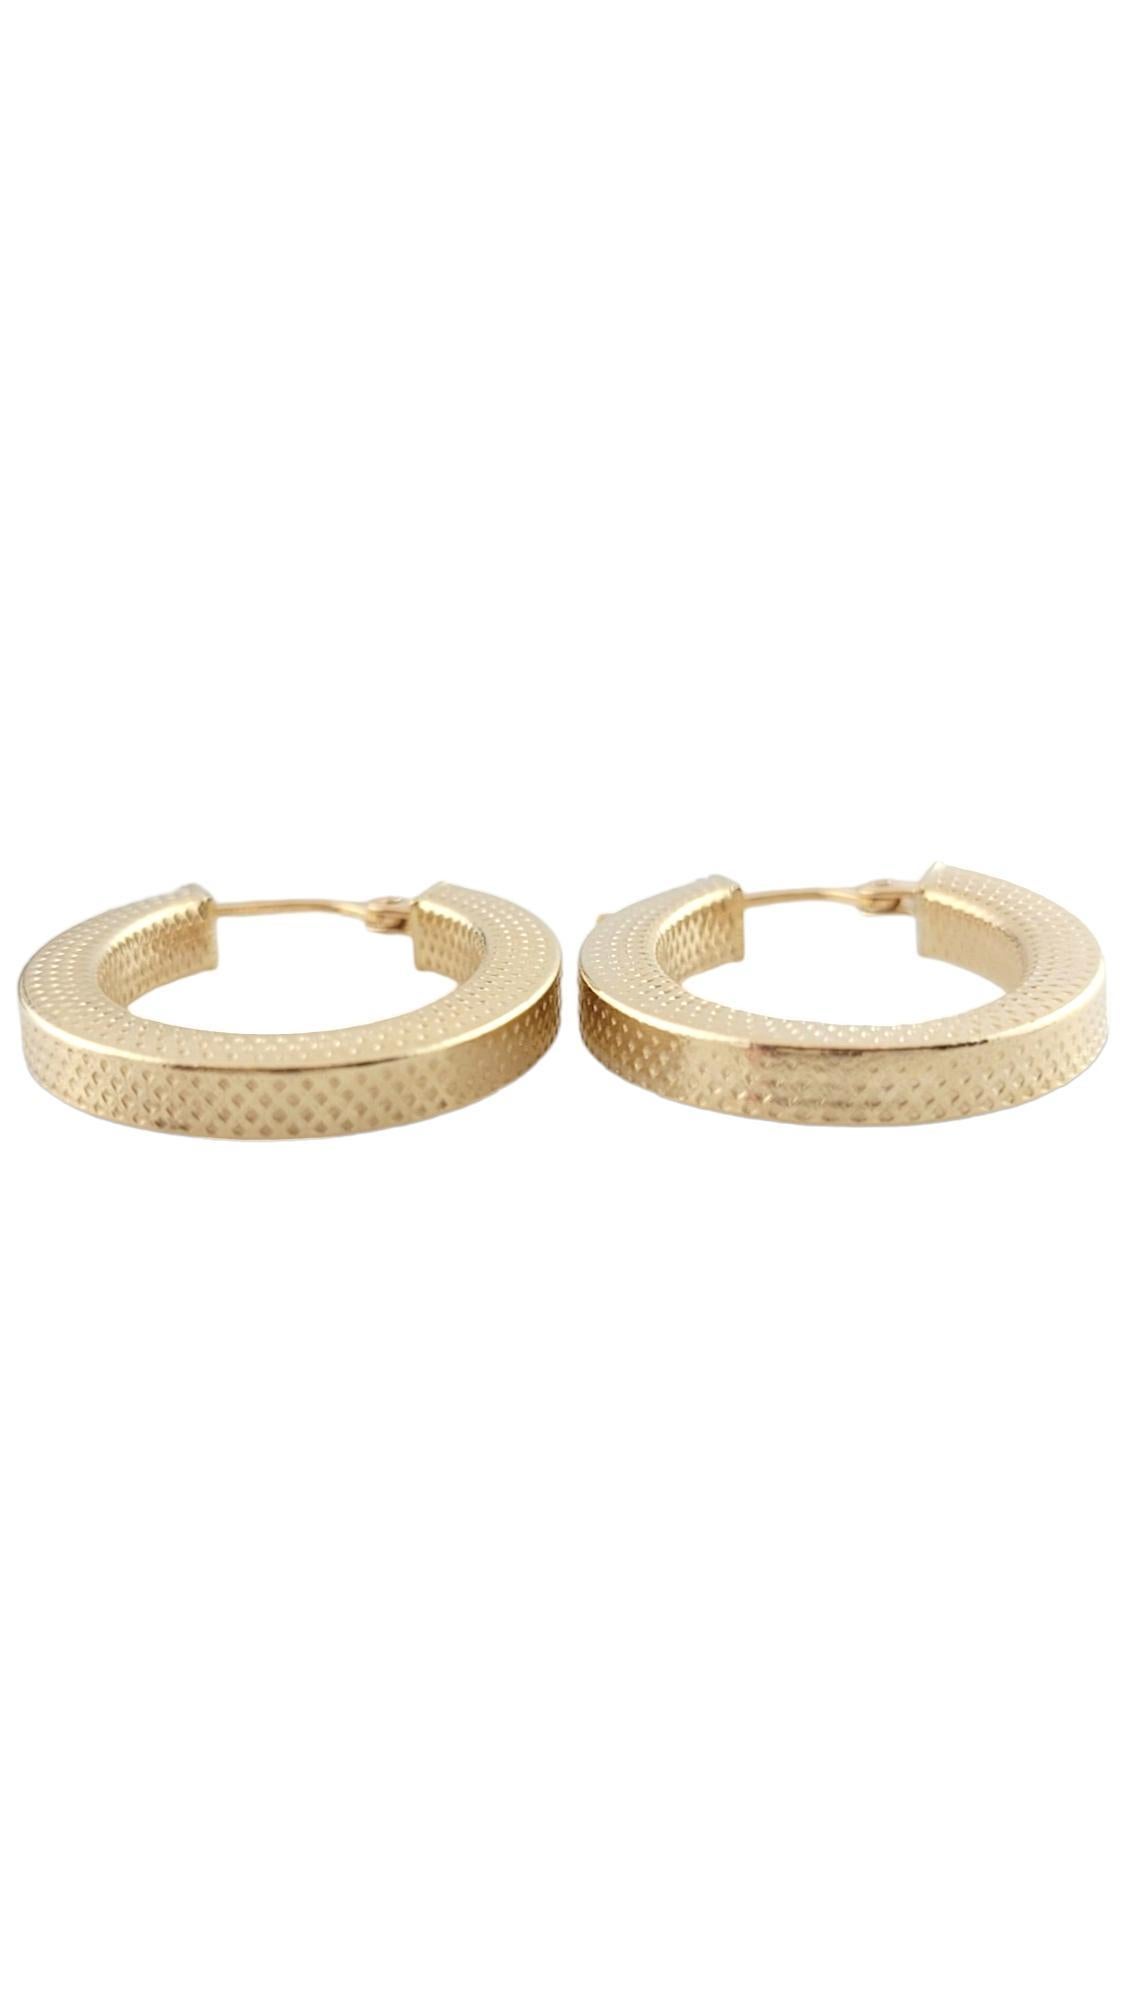 14K Yellow Gold Textured Oval Hoop Earrings #16189 In Good Condition For Sale In Washington Depot, CT